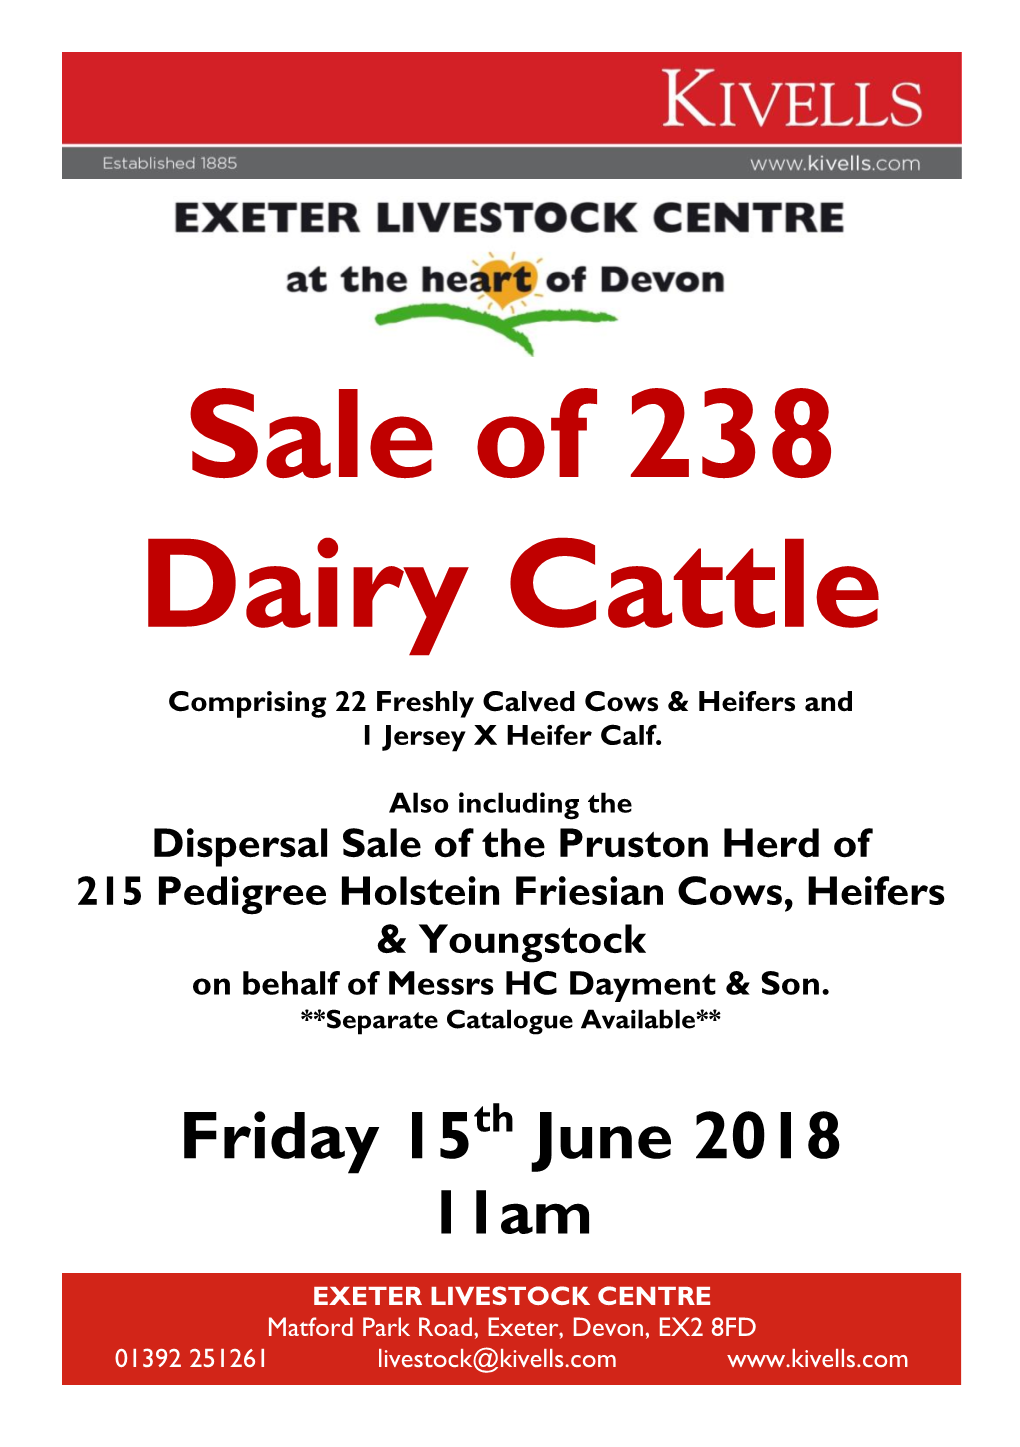 Sale of 238 Dairy Cattle